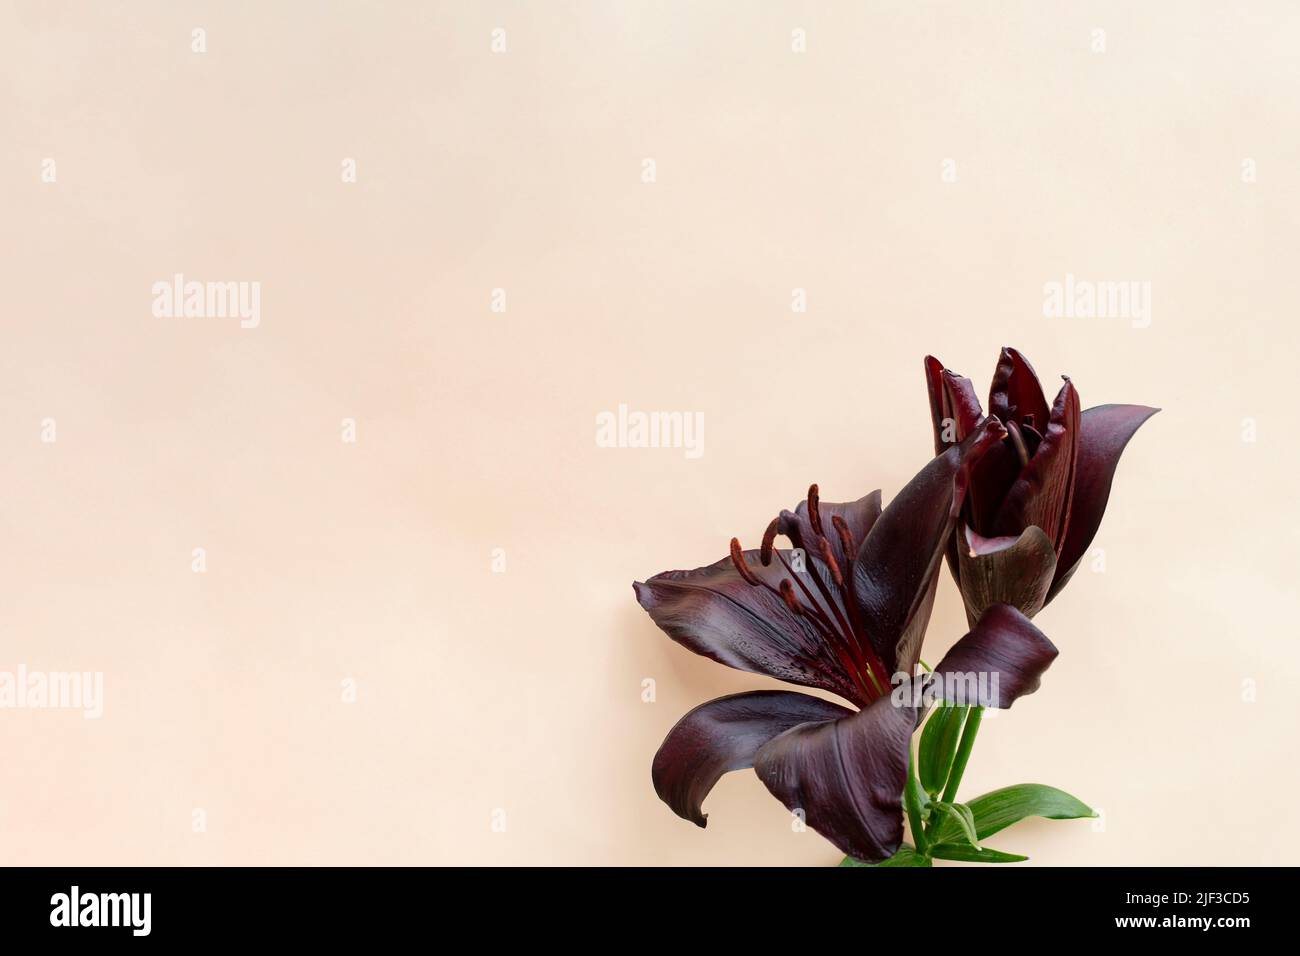 Black 'landini' lily flower, soft focus isolated on cream background. Copy space for text with a rare elegant flower. Stock Photo